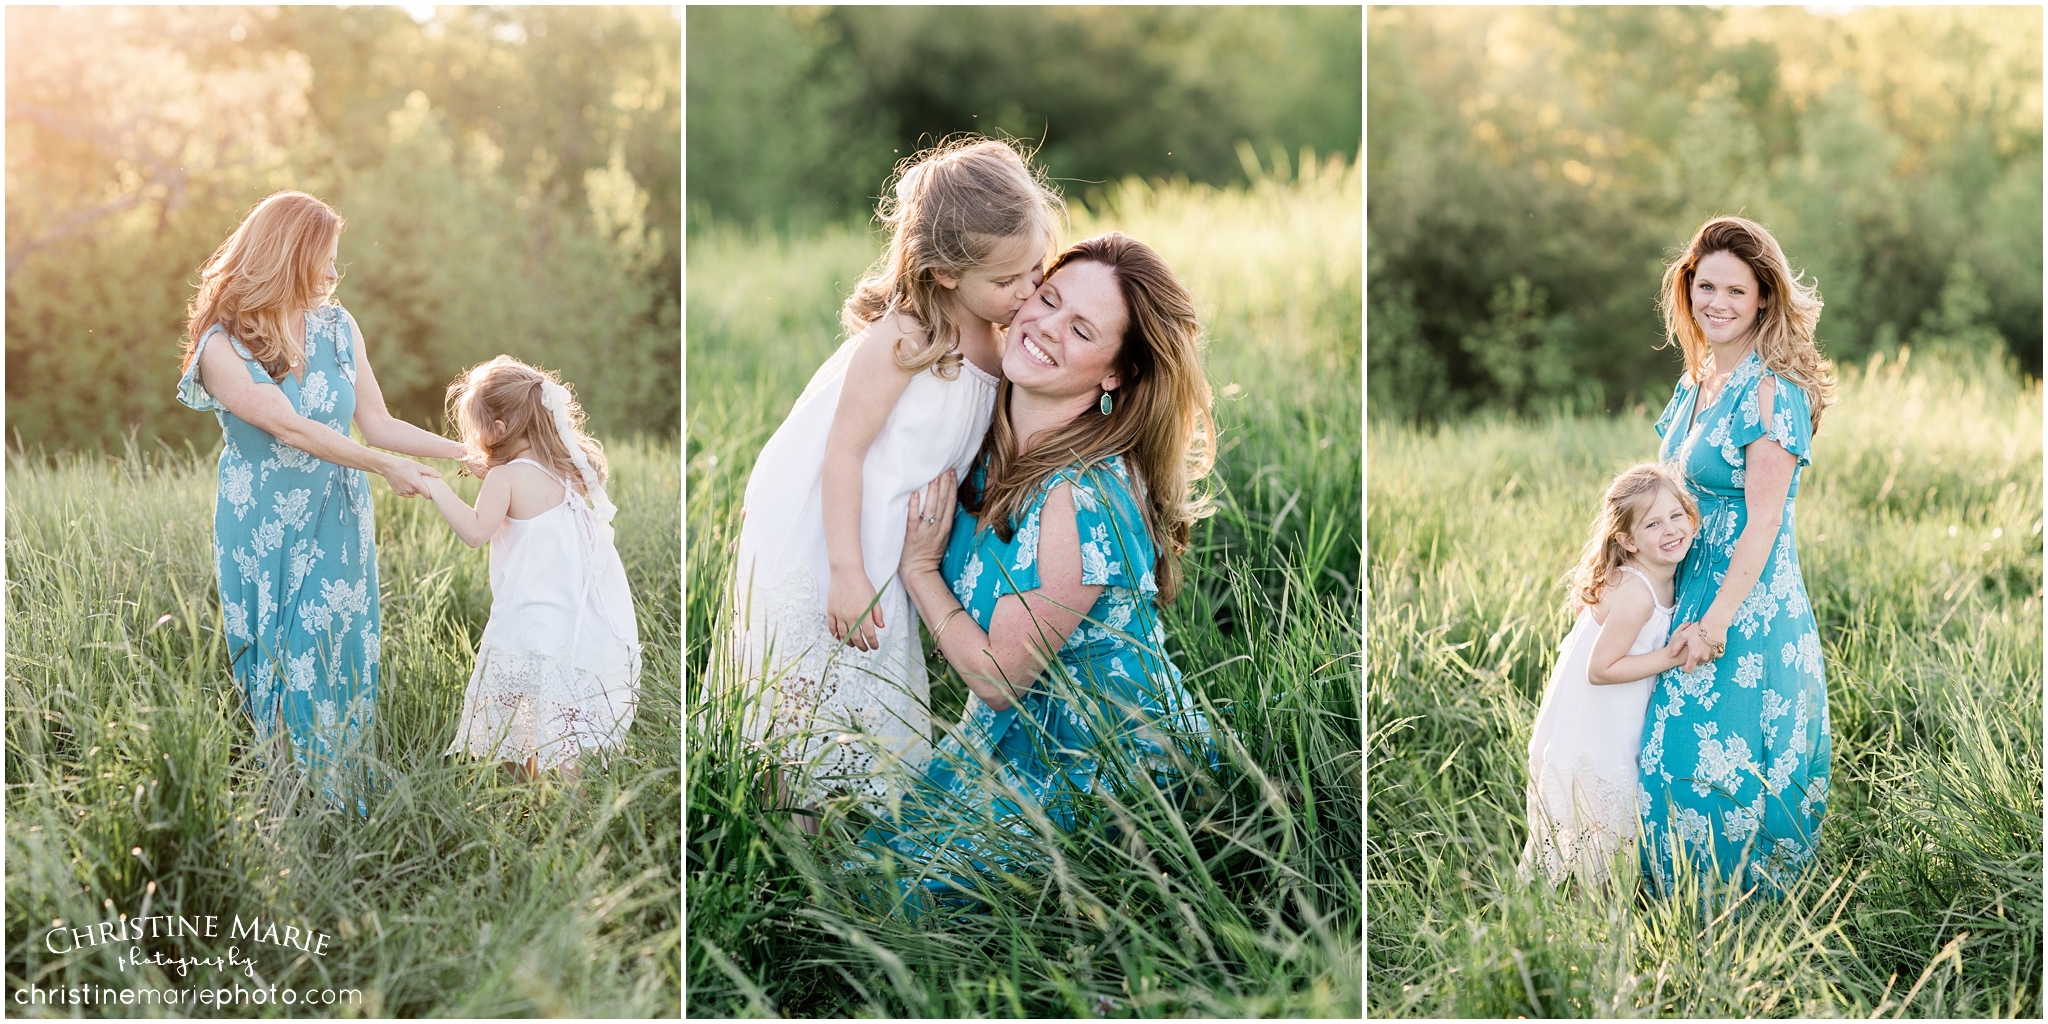 mommy and me, christine marie photography 